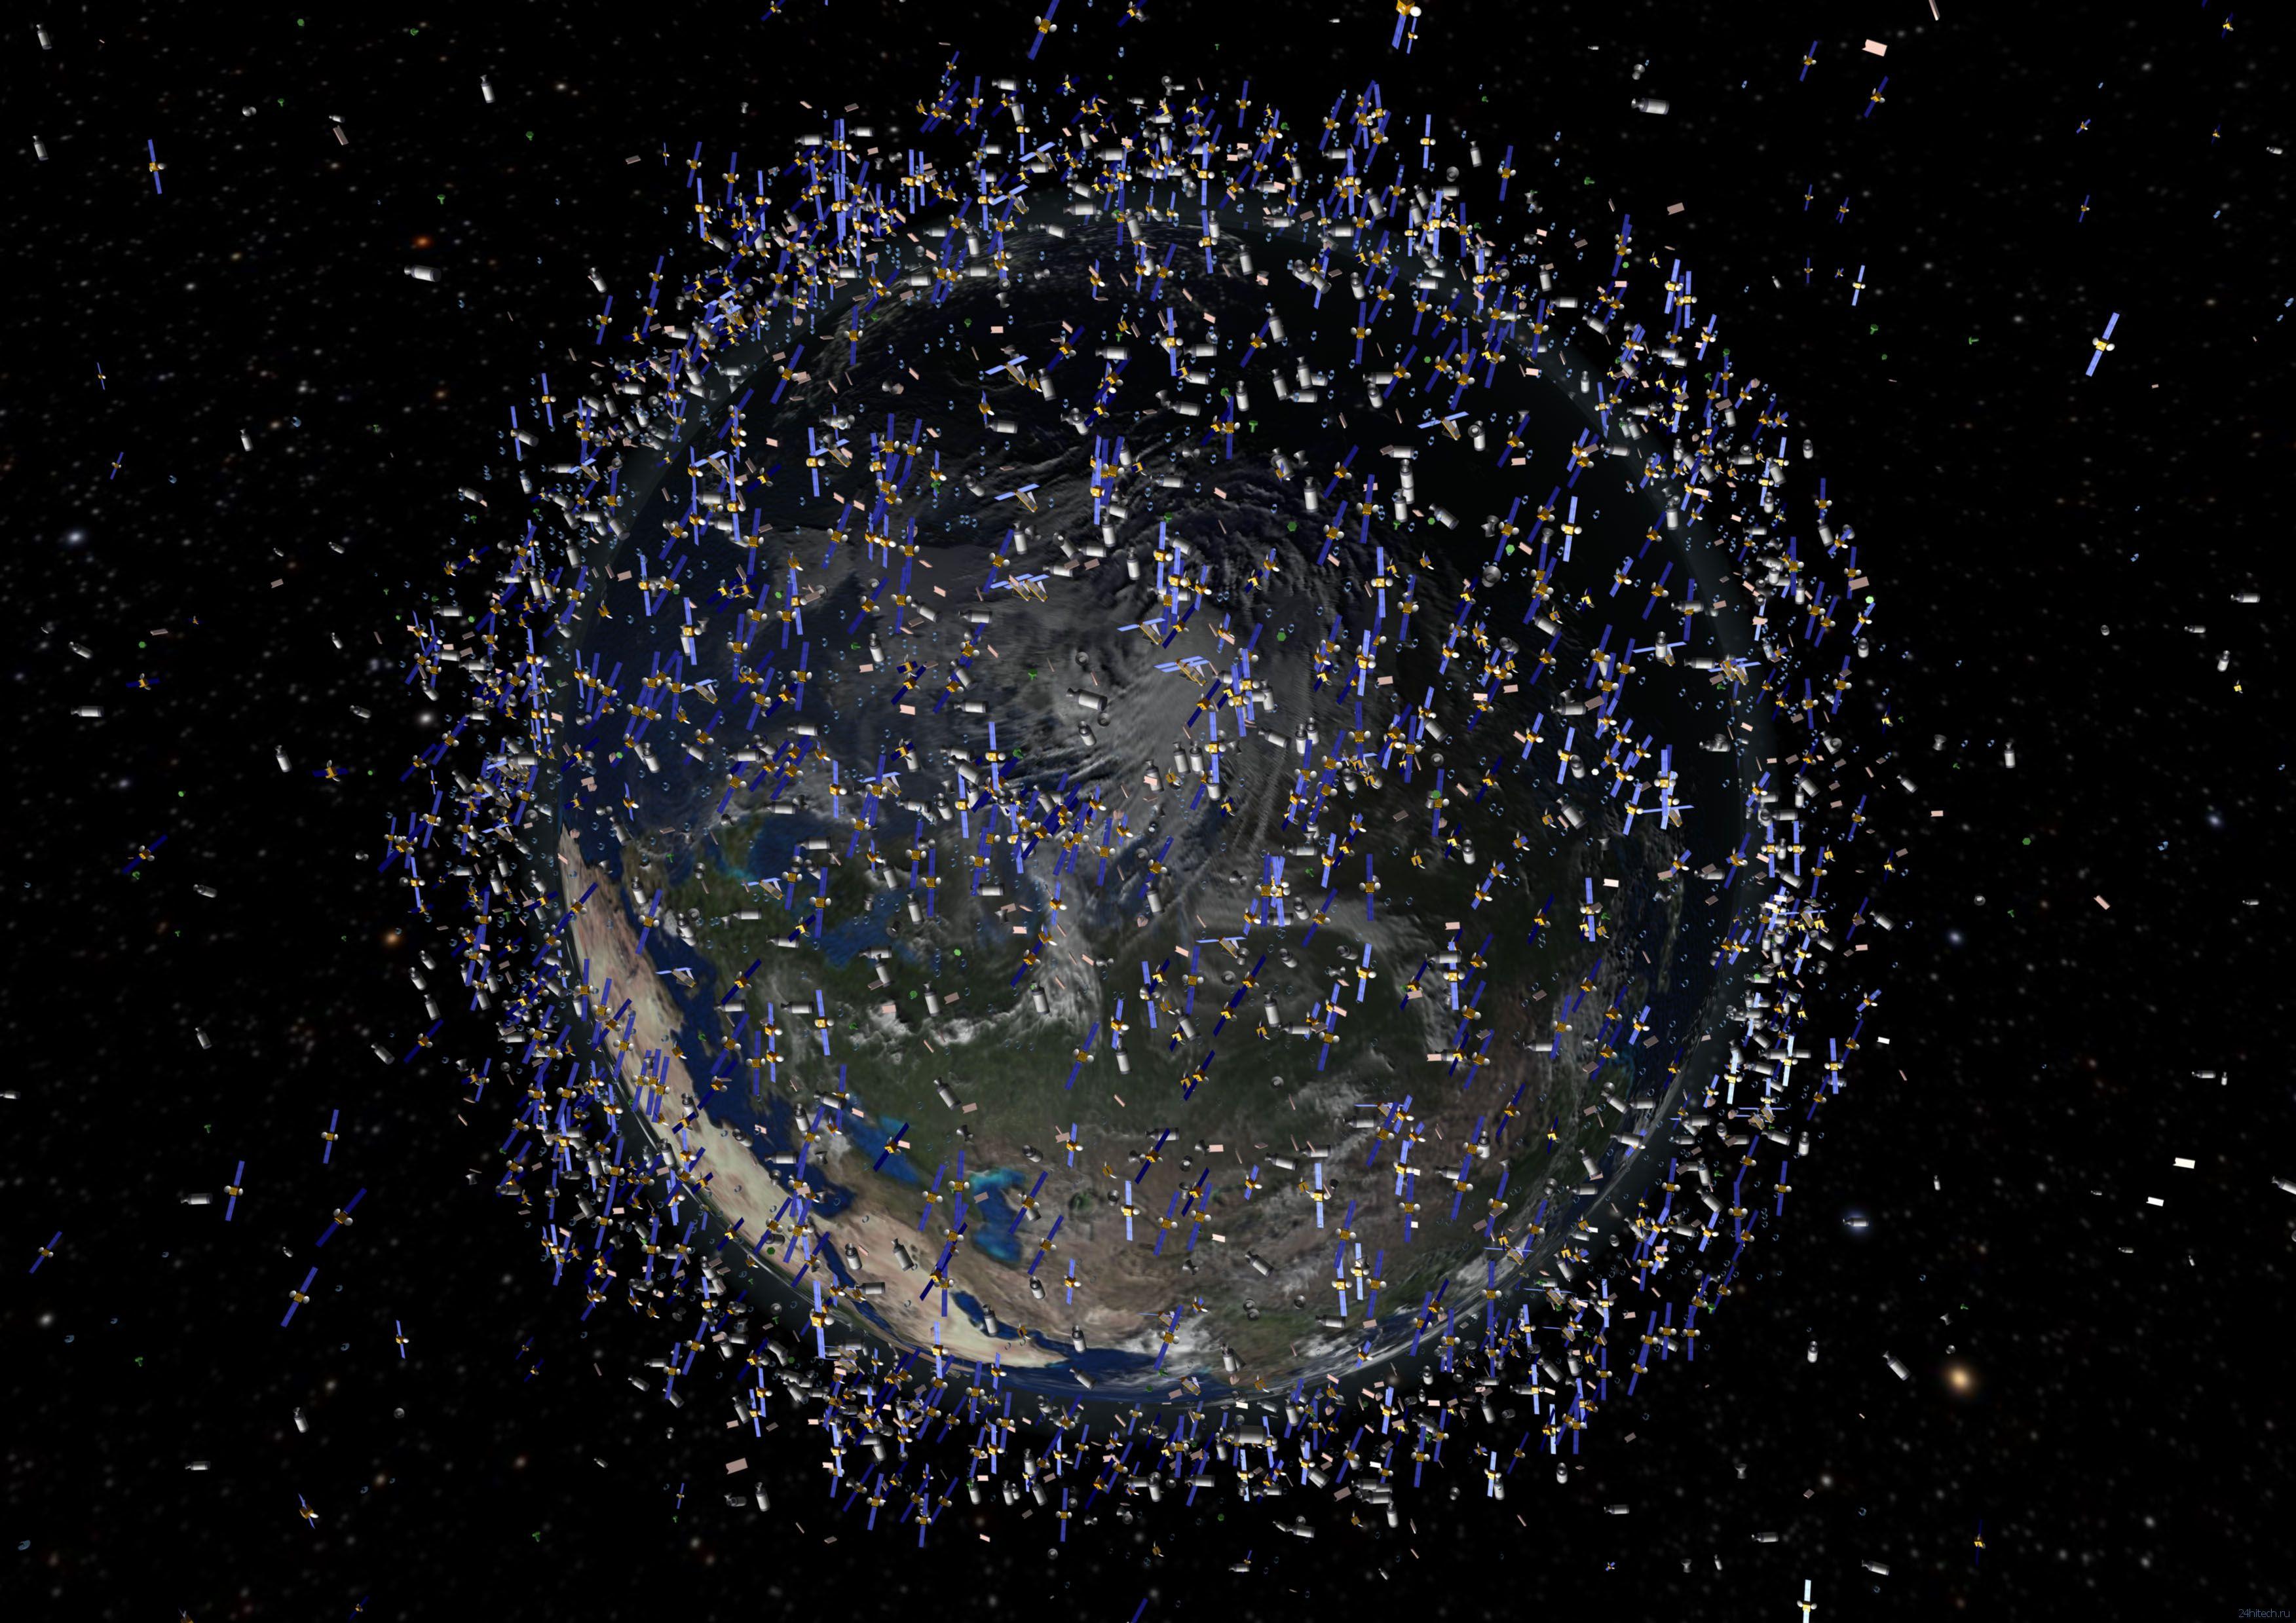 Do you know how the number of Starlink satellites grew?